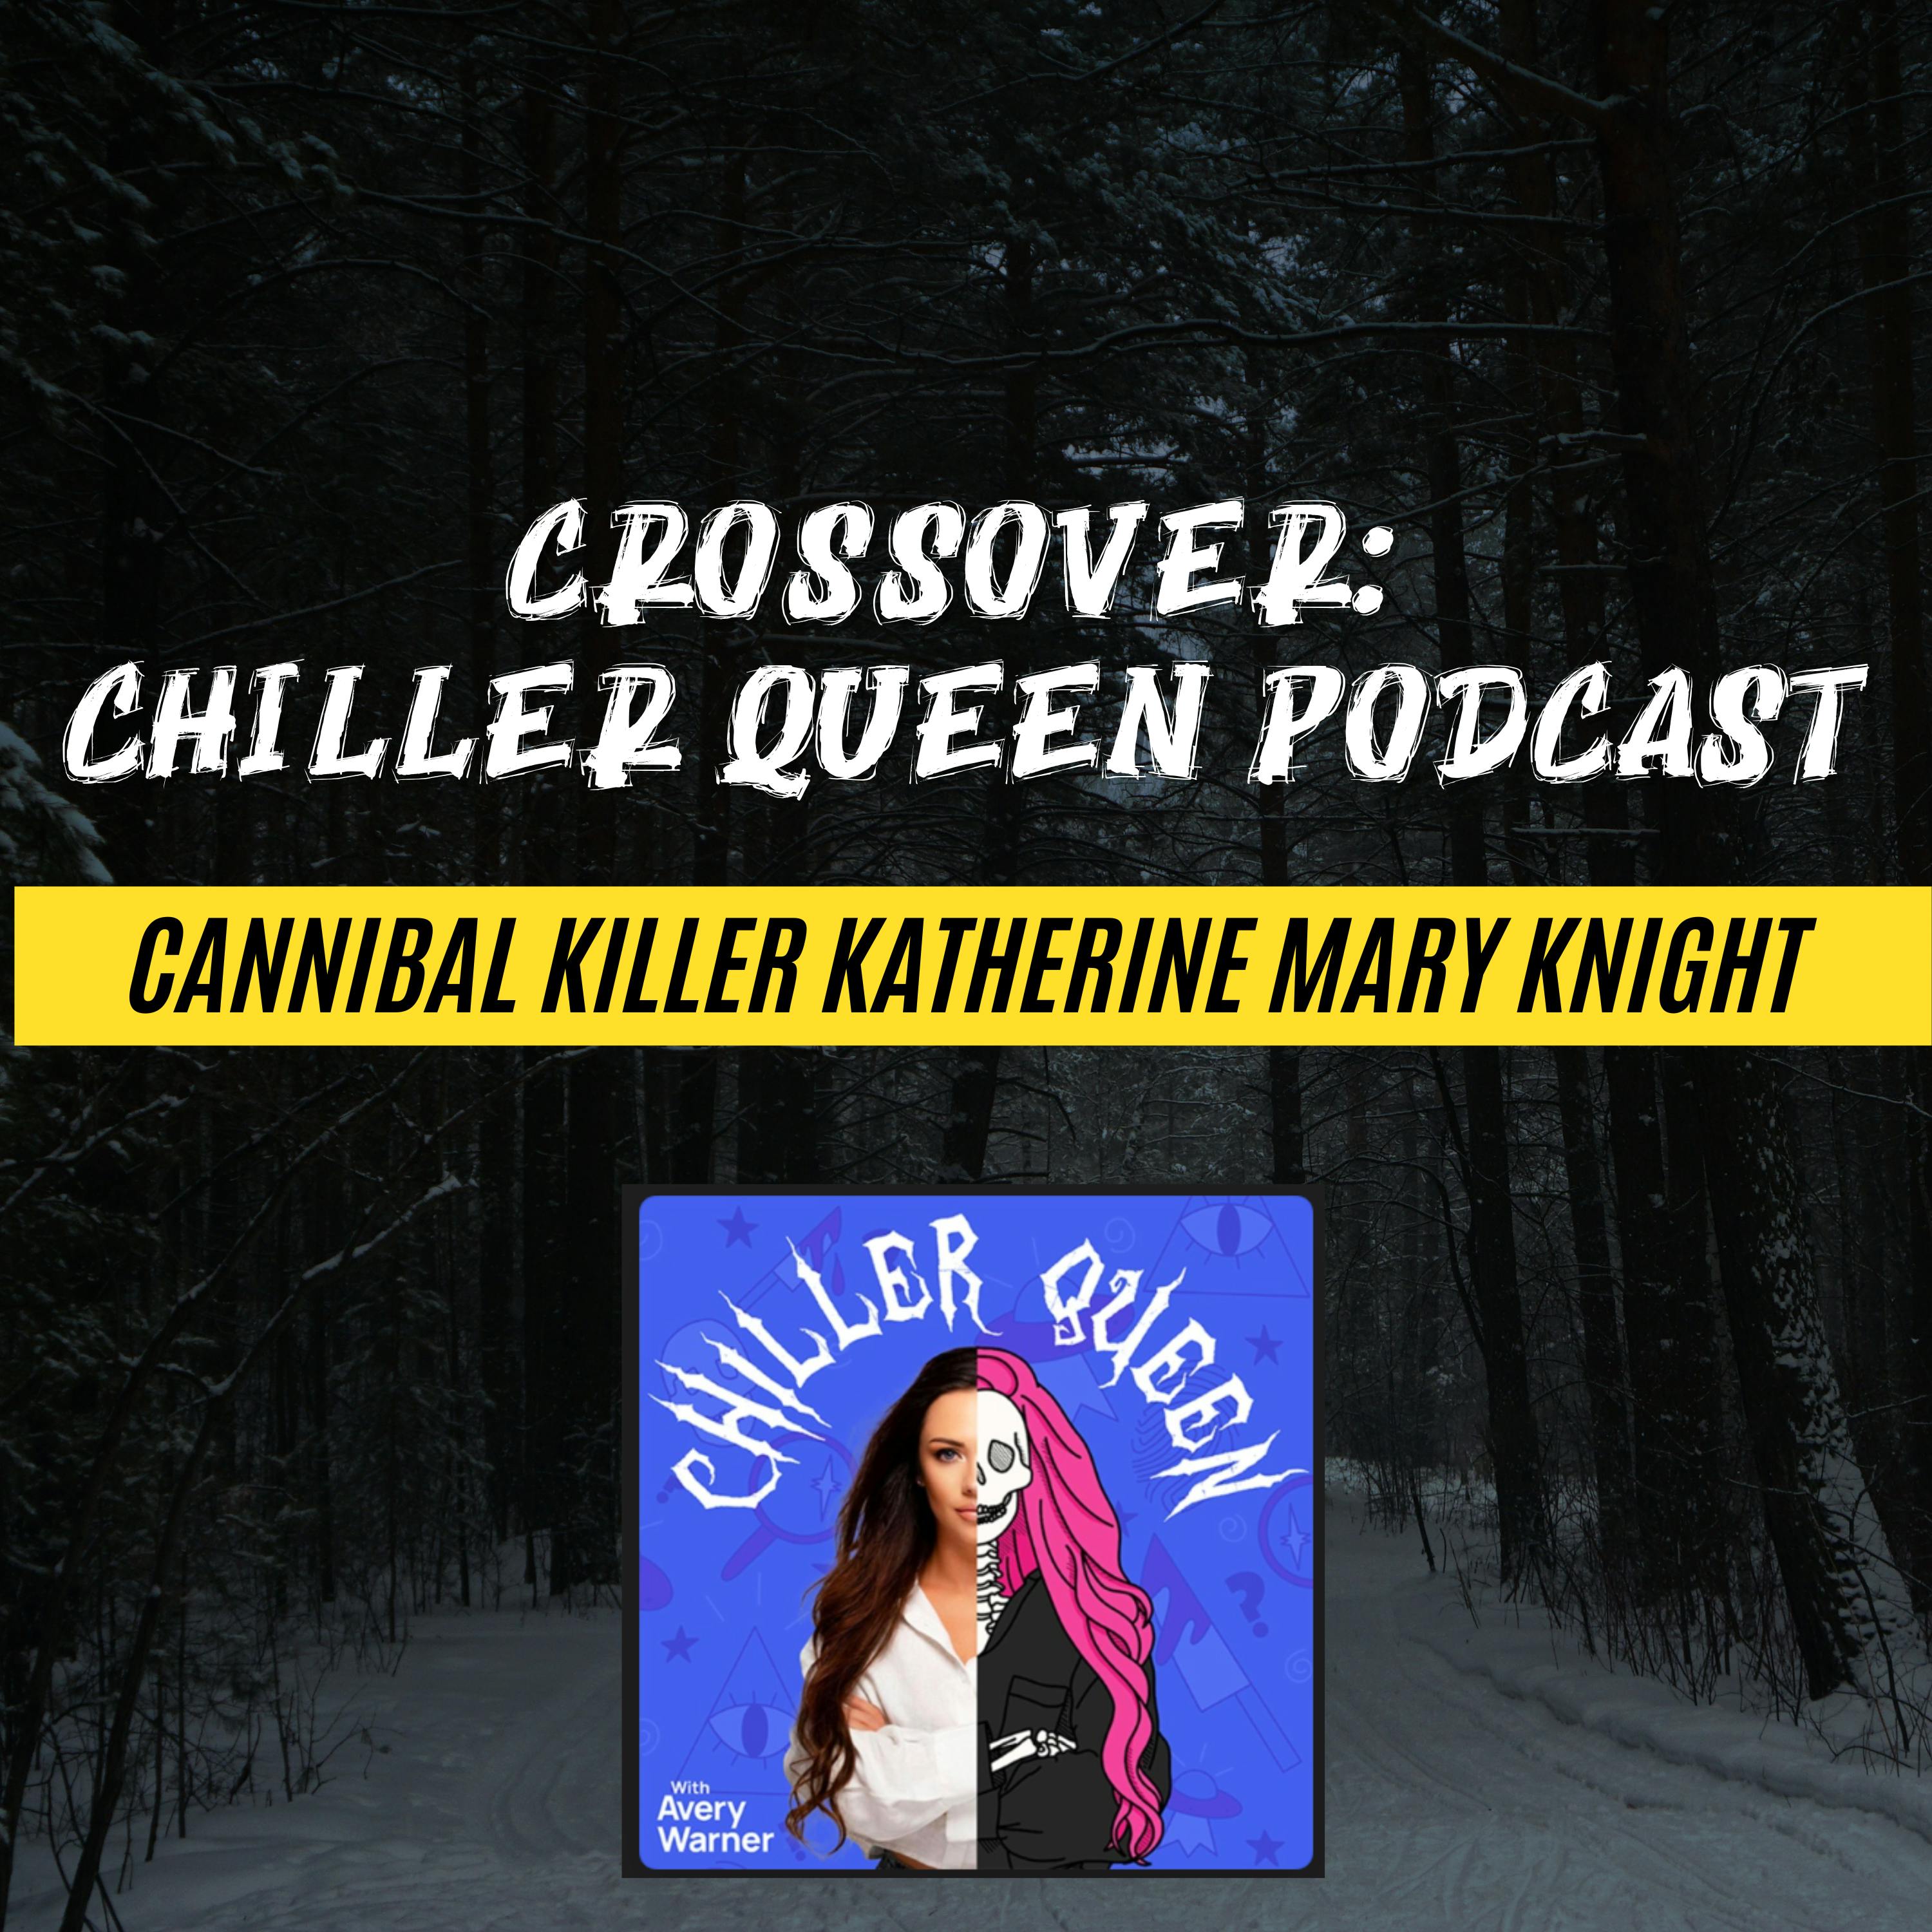 CROSSOVER: Chiller Queen Podcast - "Children, dinner's ready" (Cannibal Killer Katherine Mary Knight)